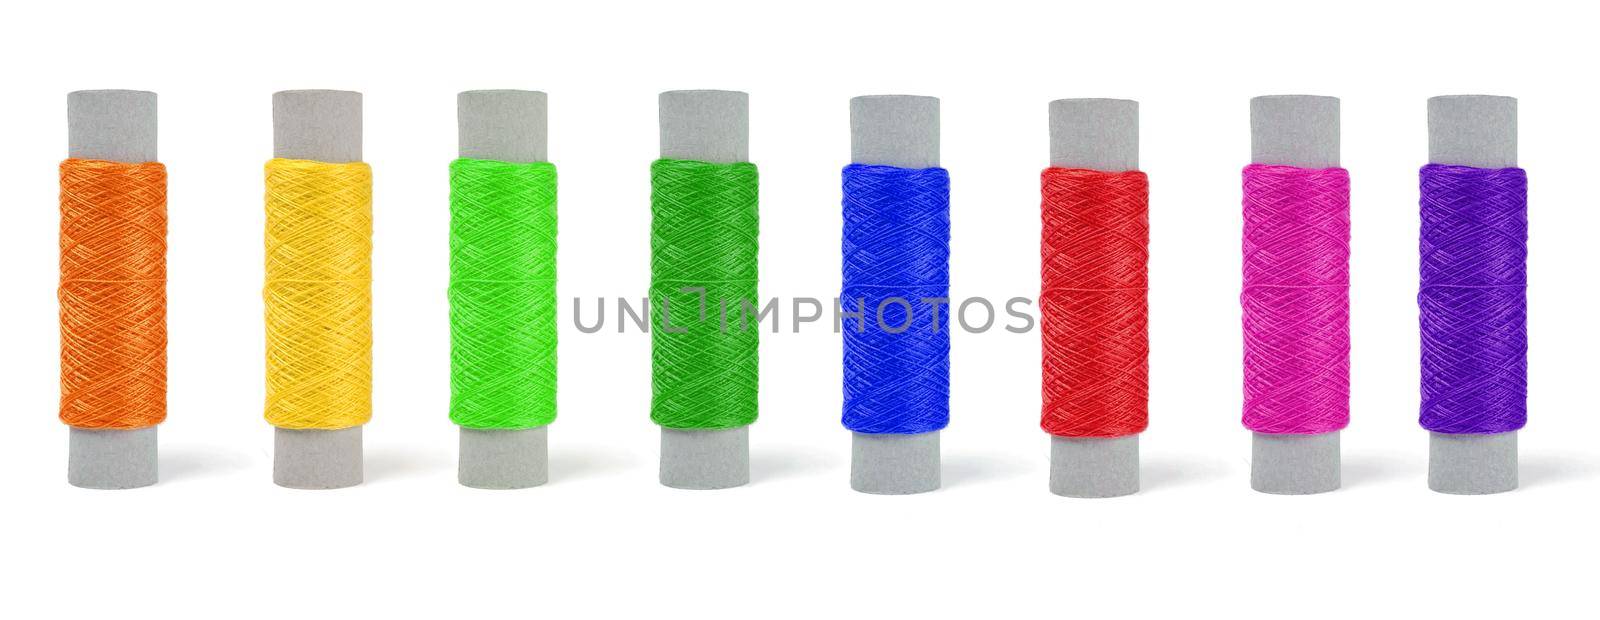 skeins of thread of different colors, set in a row on a white background